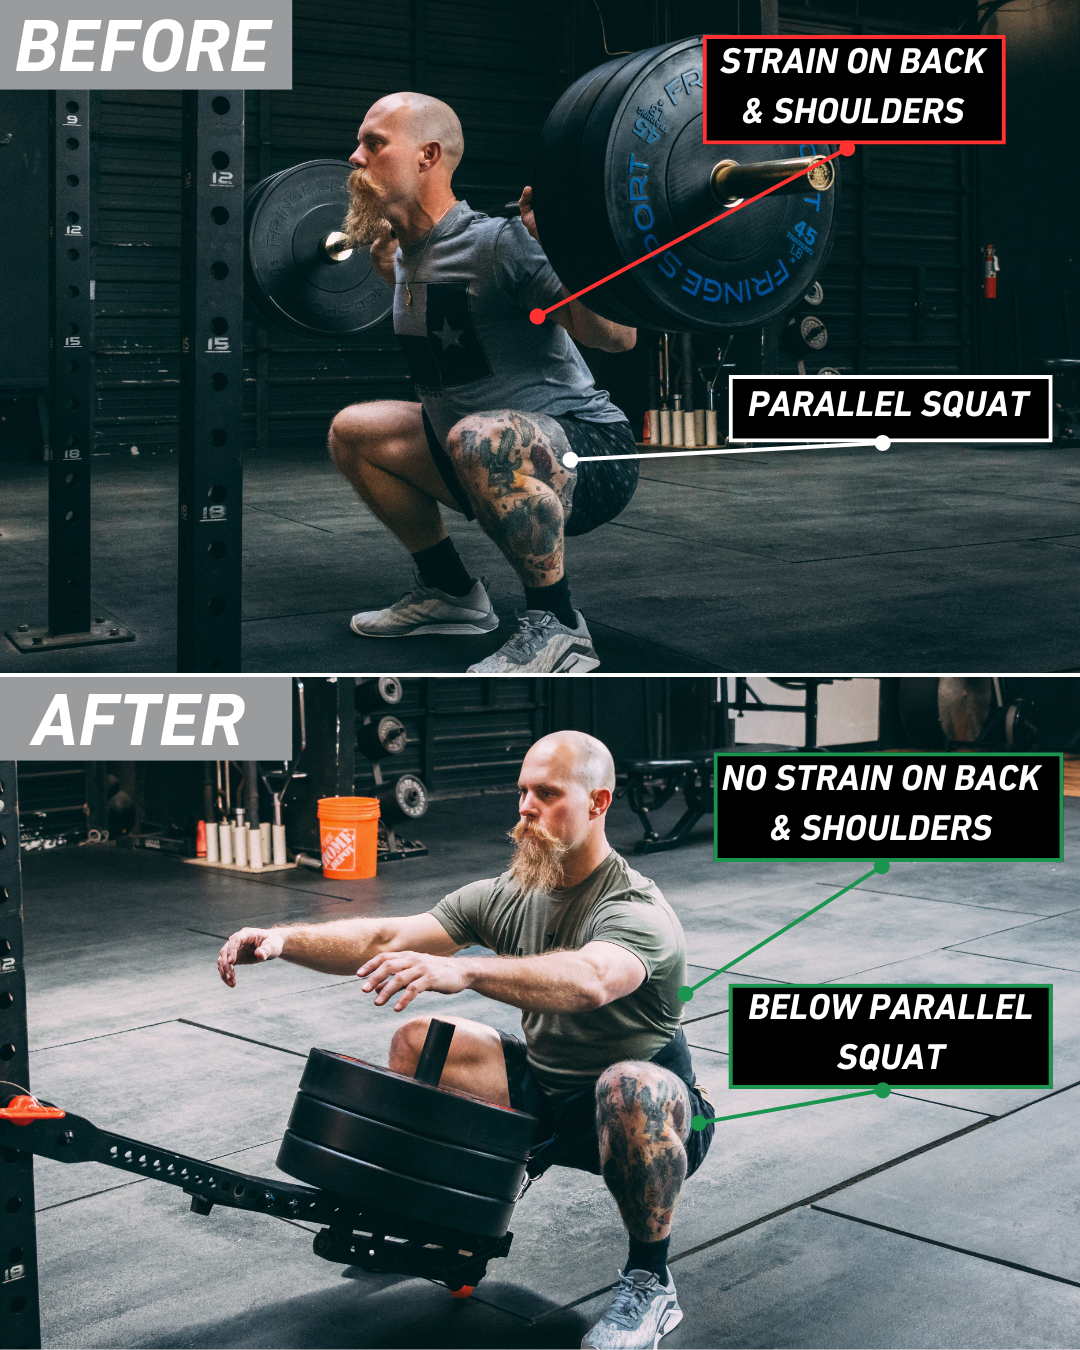 Benefits of the Mammoth belt squat is no strain on back and shoulders and you can do a below parallel squat.